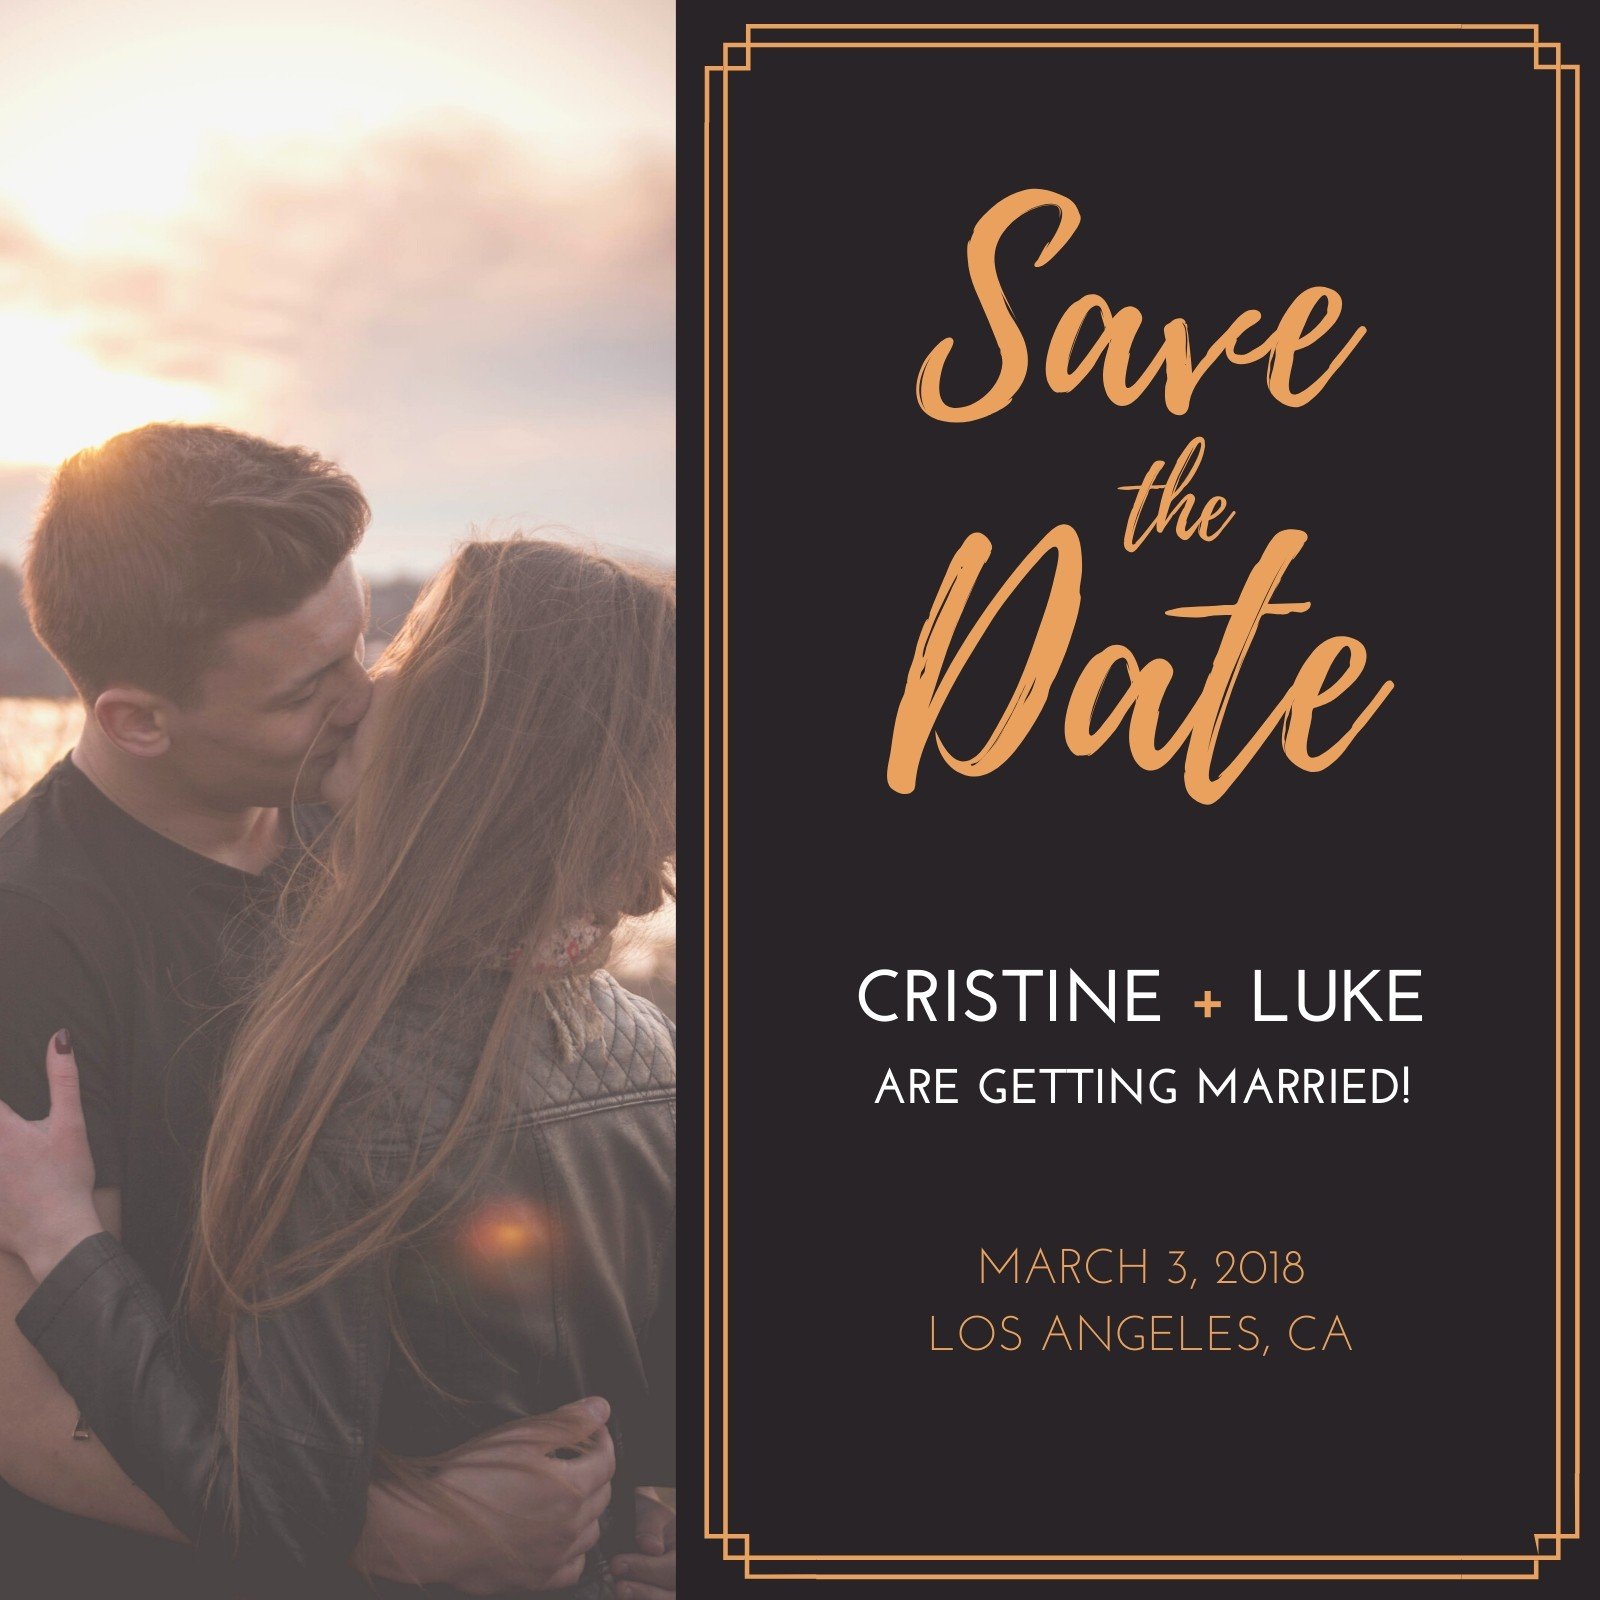 Brown and Orange Bordered Save the Date Invitation Templates by Canva